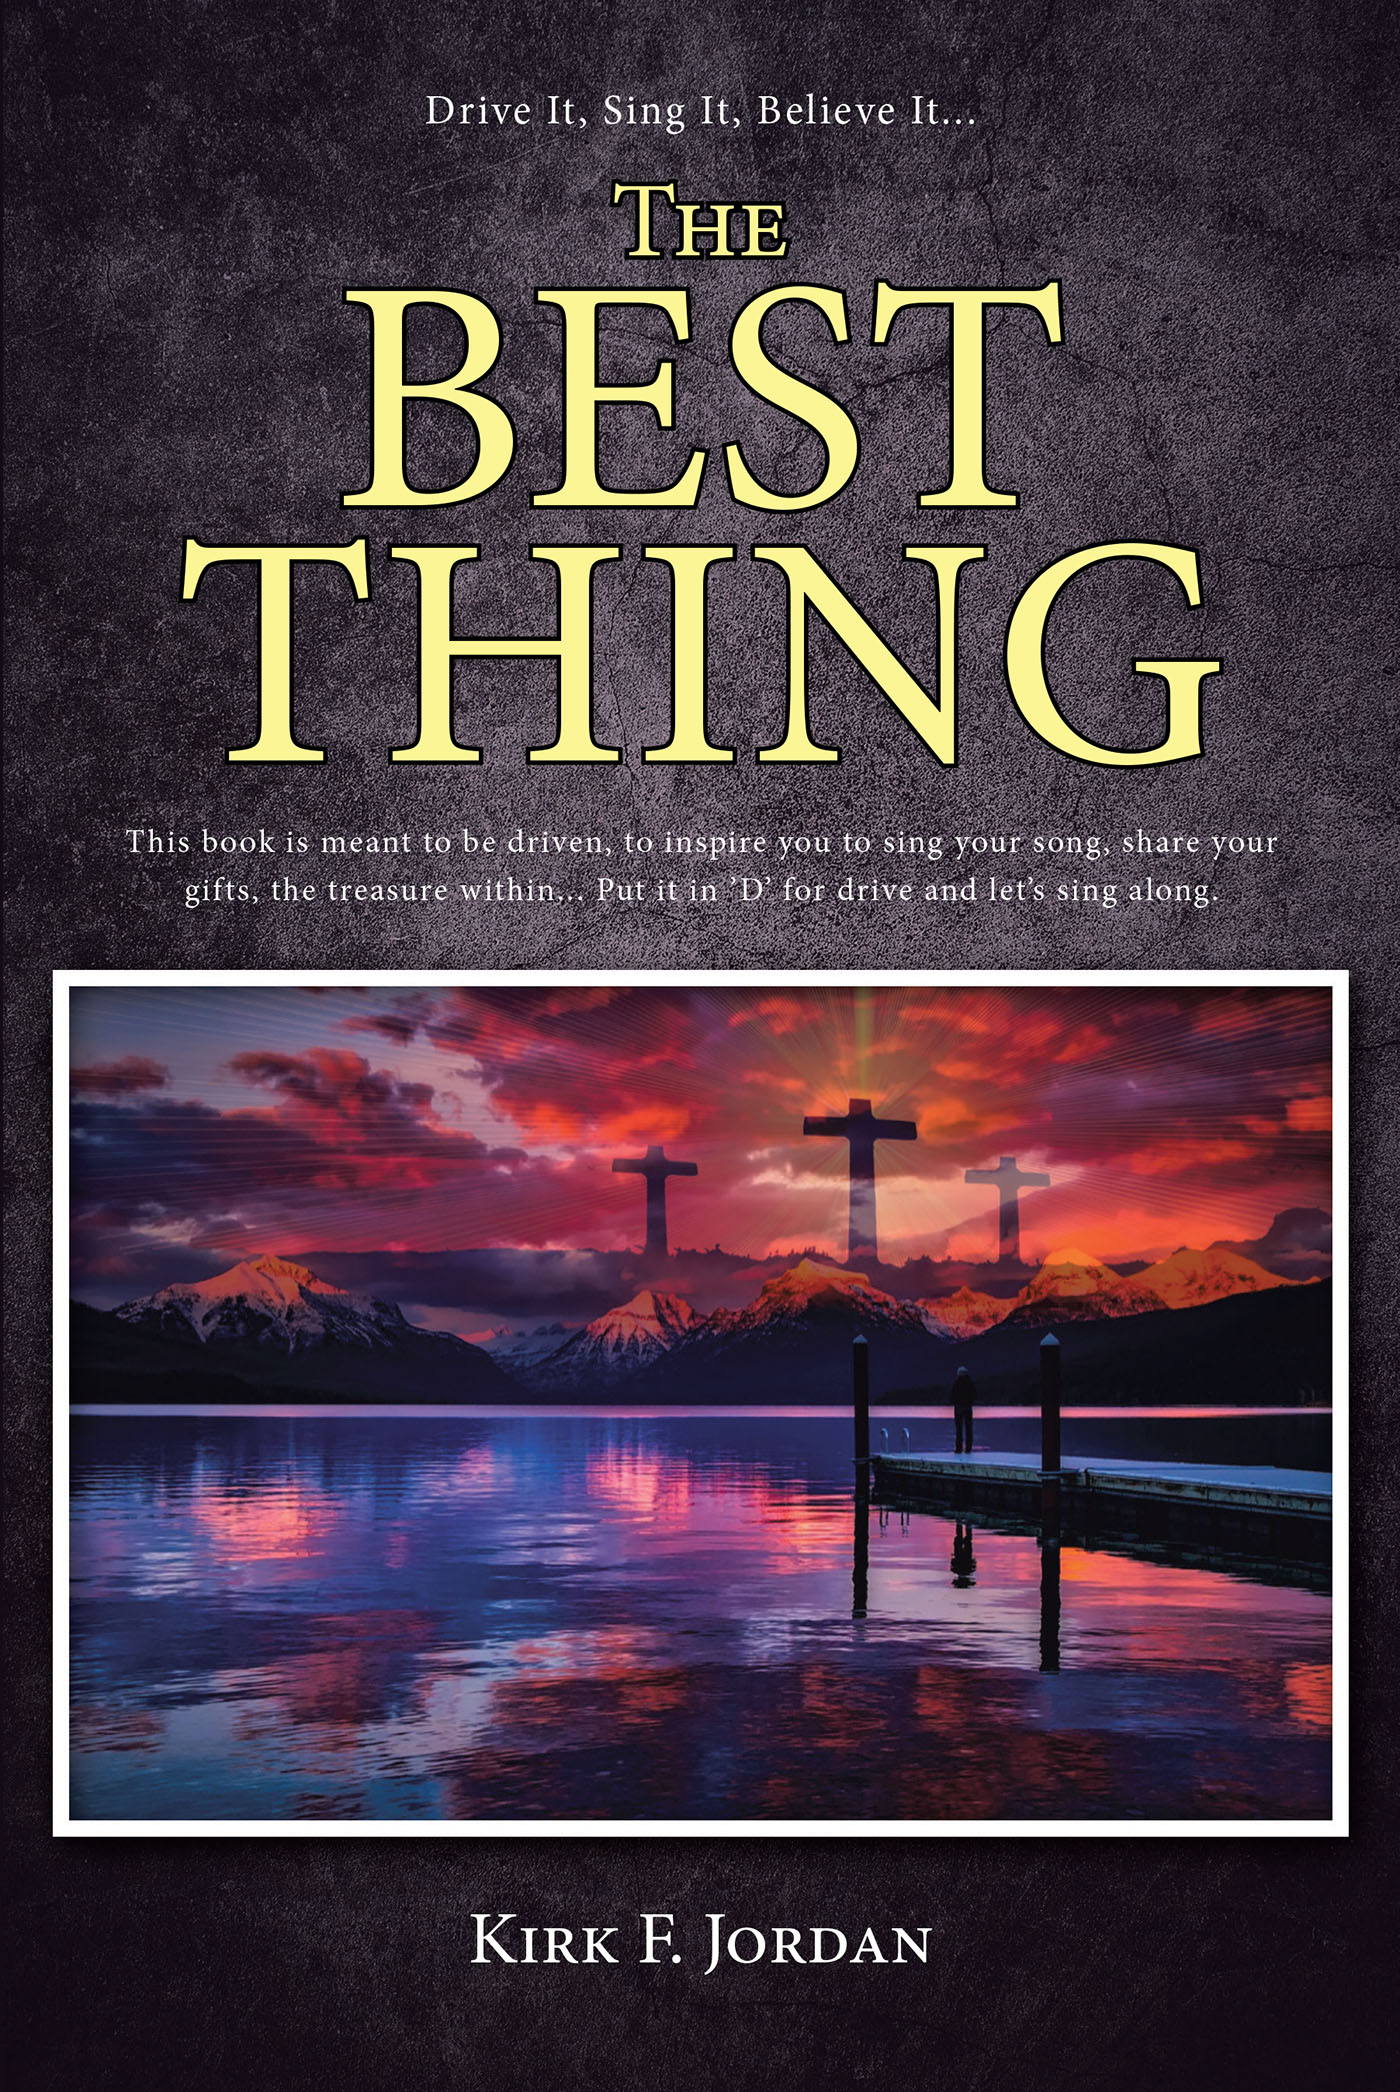 Kirk F. Jordan’s Newly Released "The Best Thing" is a Powerful Reminder of the Comfort and Peace Accepting God Brings